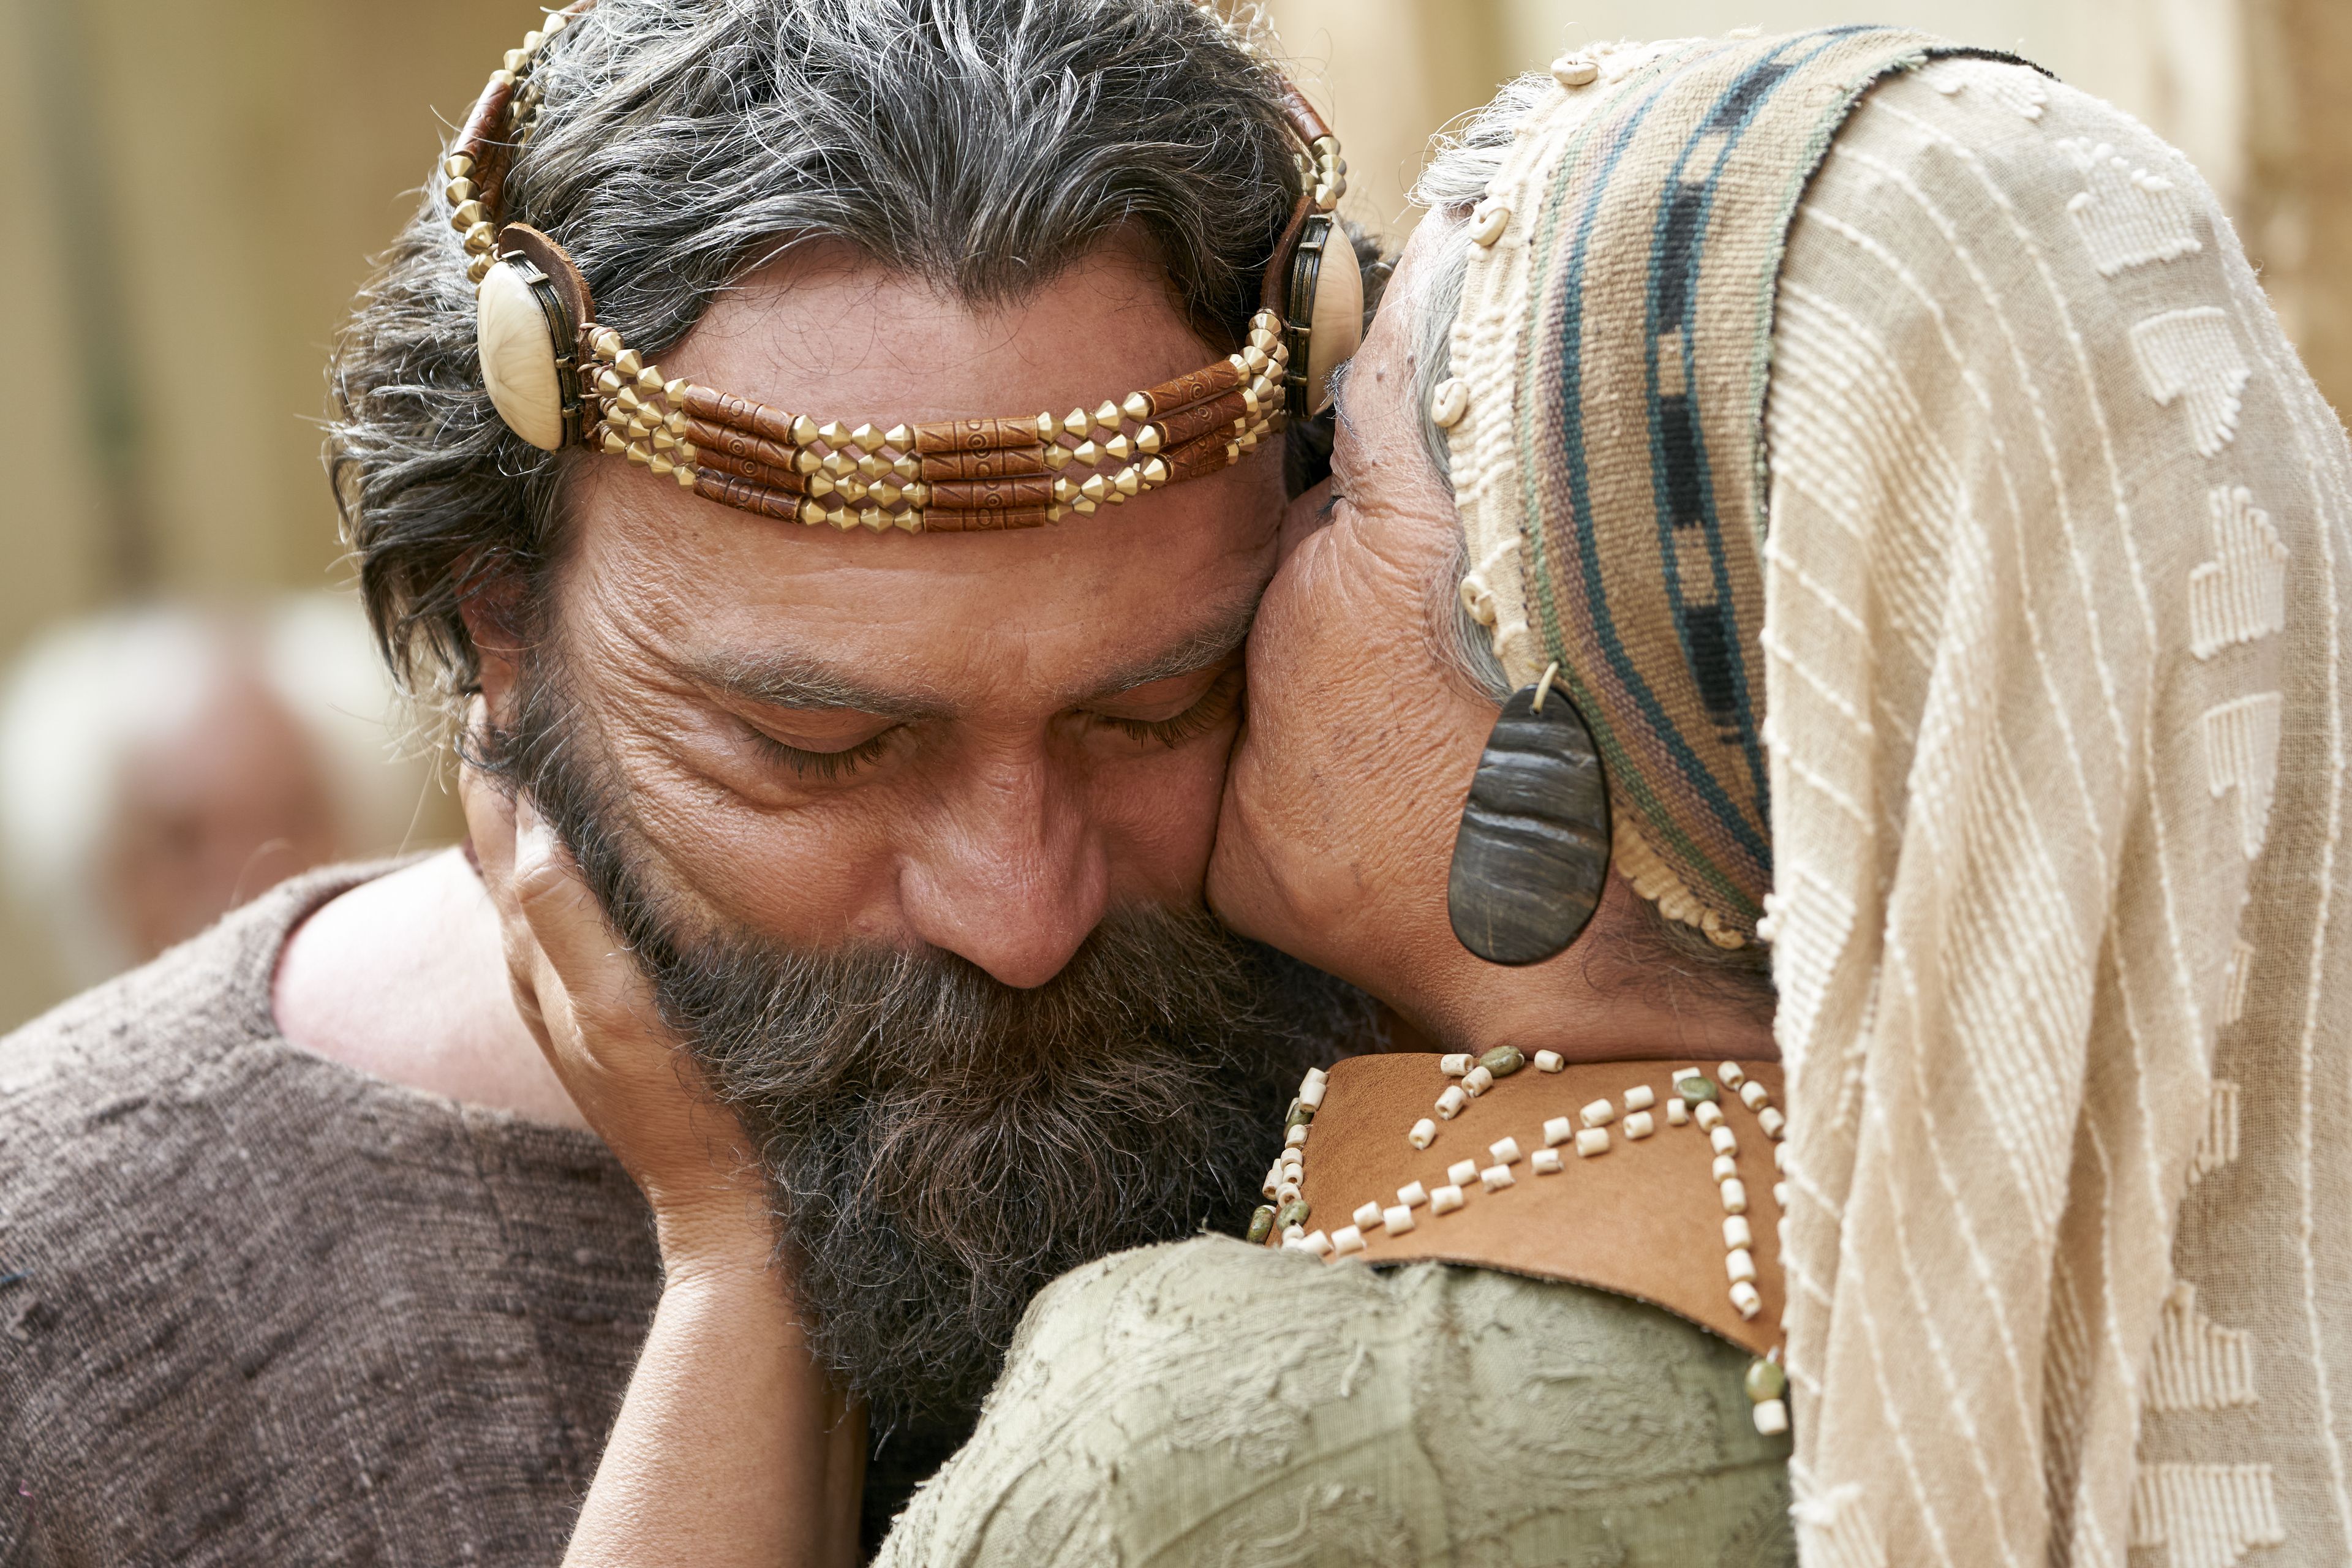 King Benjamin's wife gives King Benjamin a kiss on the cheek before he goes to speak to the Nephites in the Land of Zarahemla.